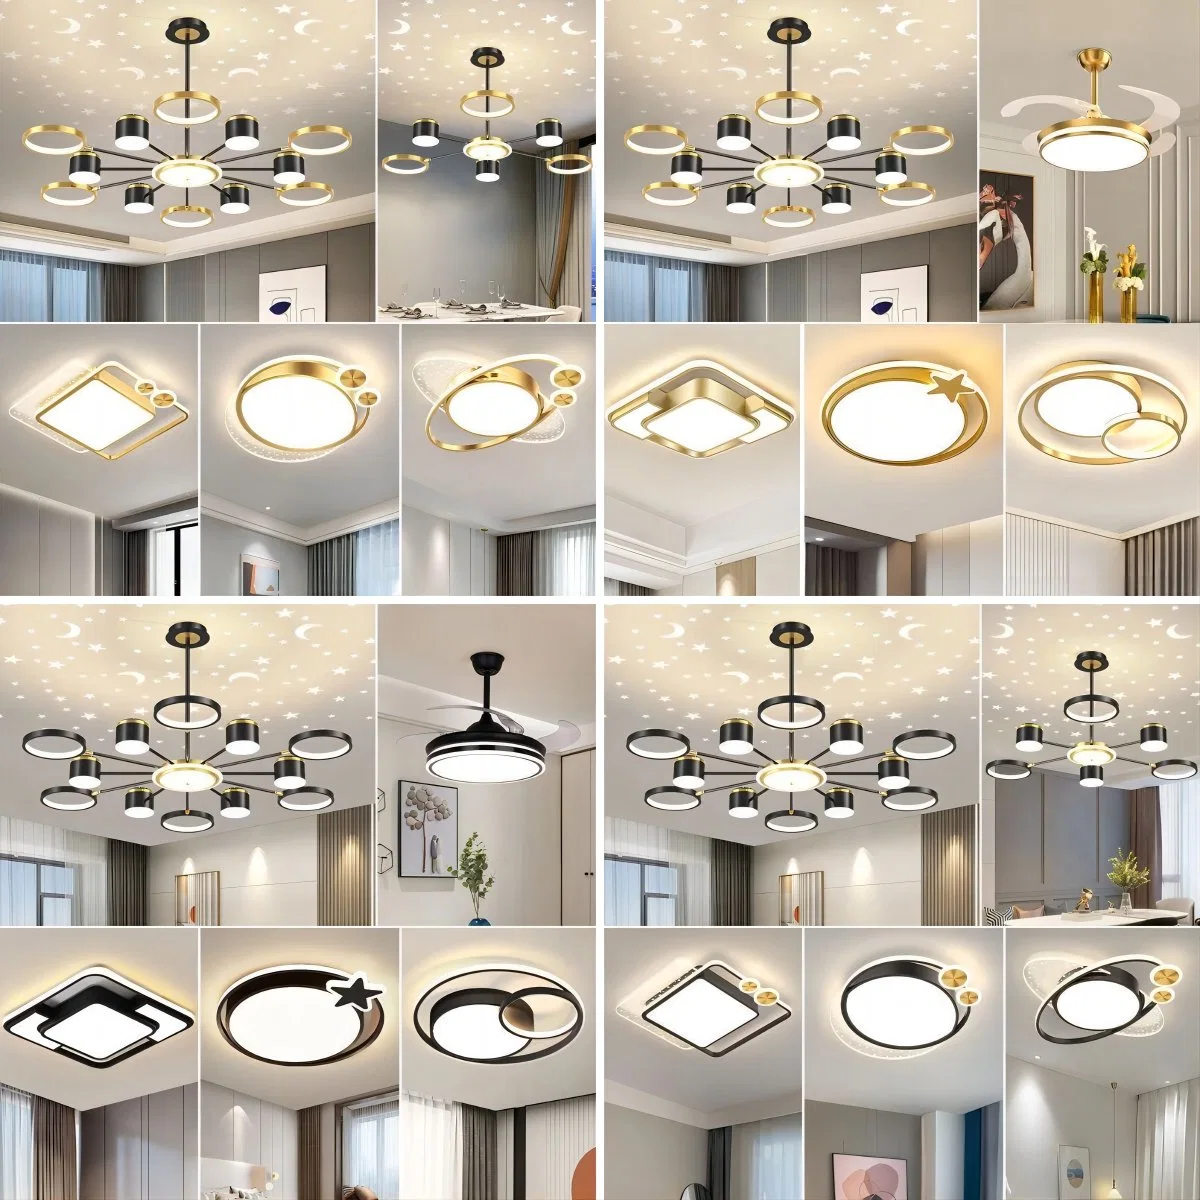 Wholesale/Supplier Price Guzhen Zhongshan Interior Lighting Clear Black Hotel Project Modern Design LED Glass Customized Crystal Chandelier Lamp Manufacturer in China